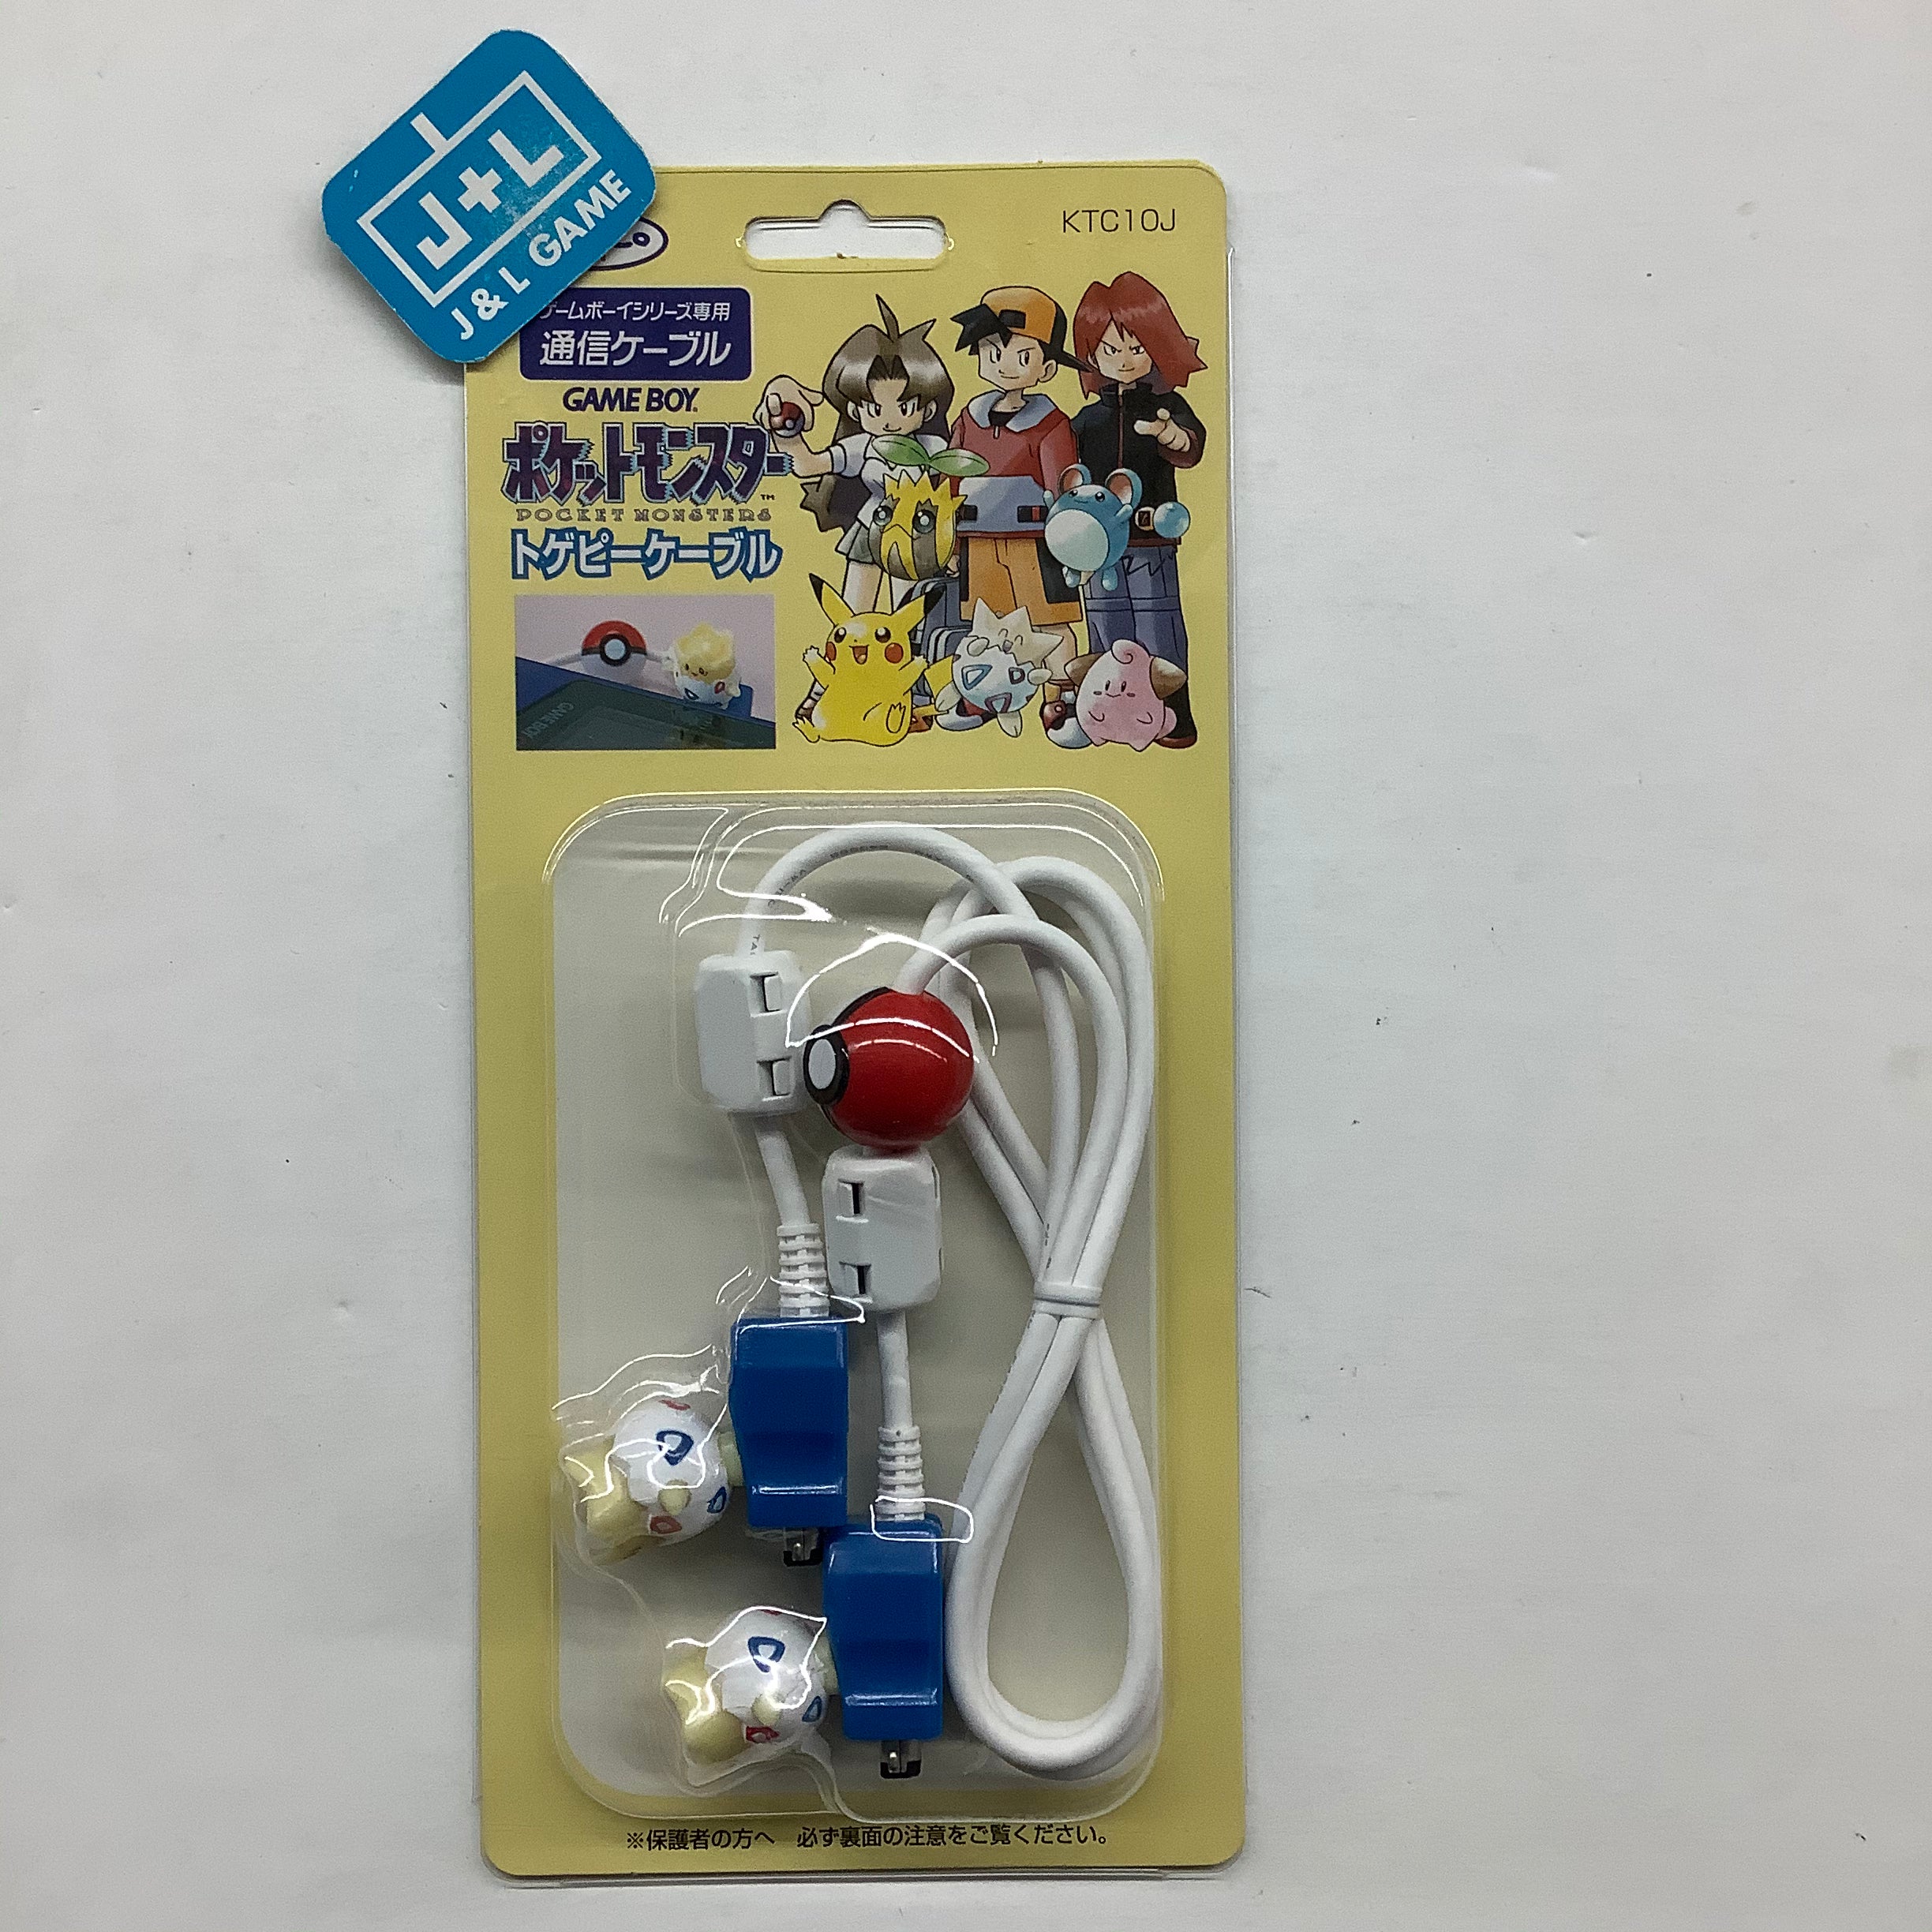 Kemco Link Cable (Togepi White) - (GBC) Game Boy Color Accessories Kemco   